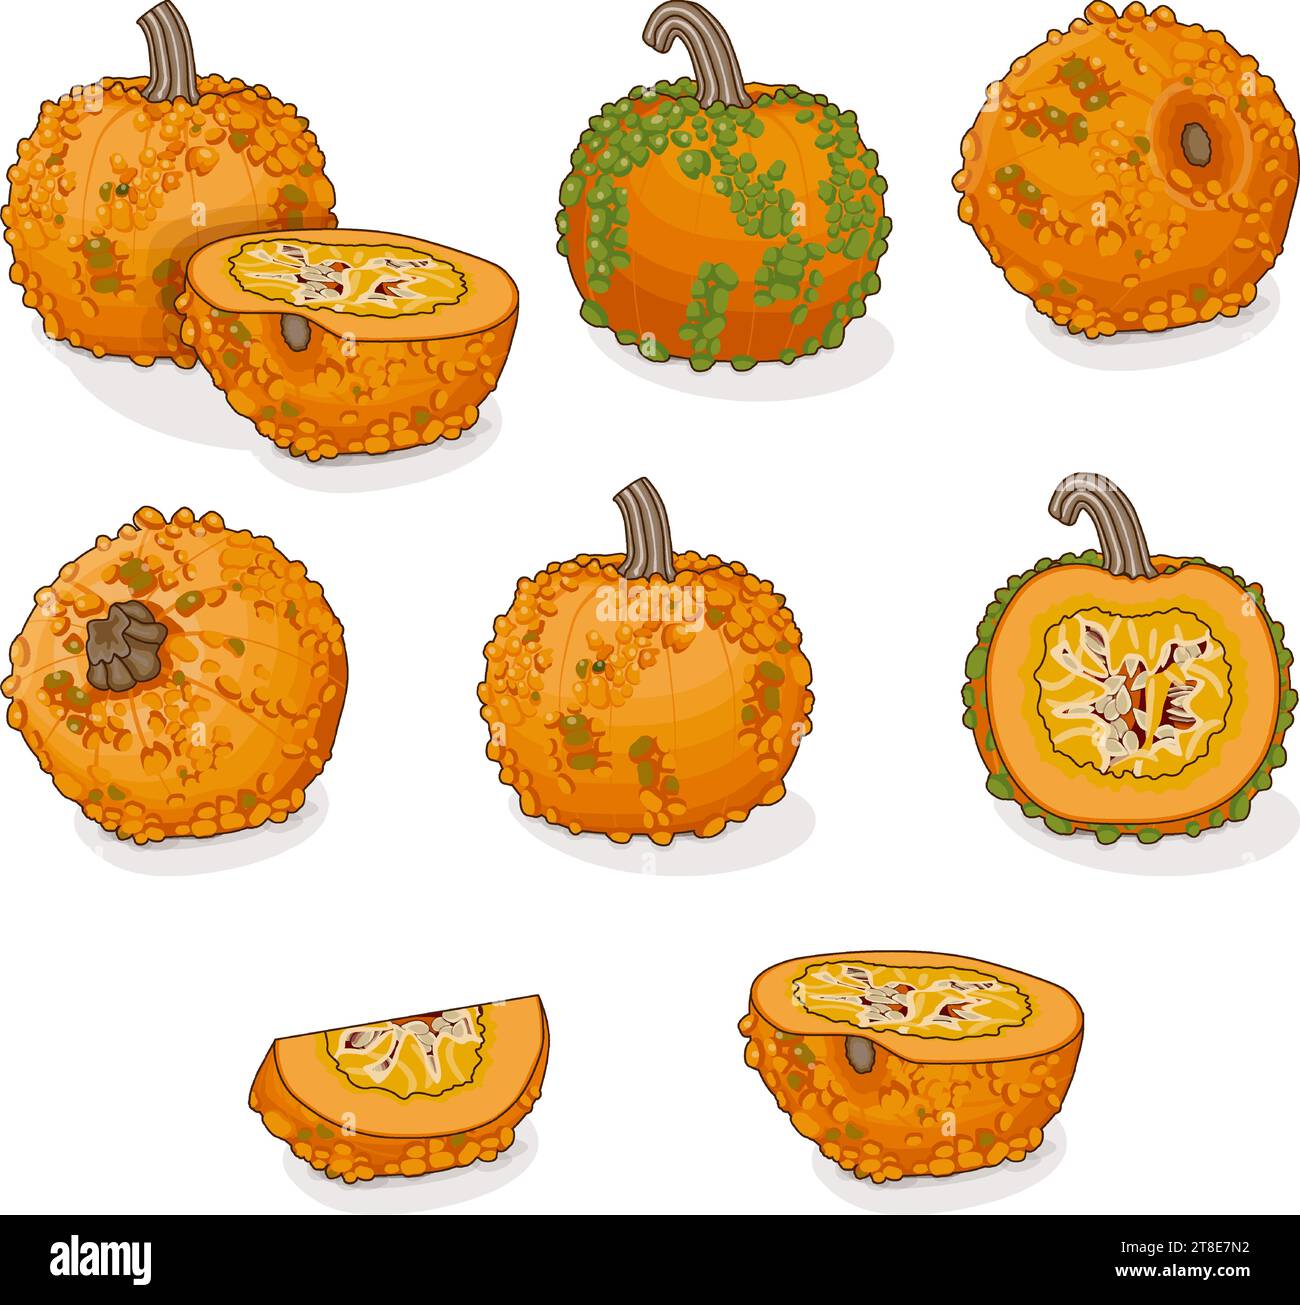 Set of Knucklehead Pumpkins. Winter squash. Cucurbita pepo. Fruits and vegetables. Clipart. Isolated vector illustration. Stock Vector